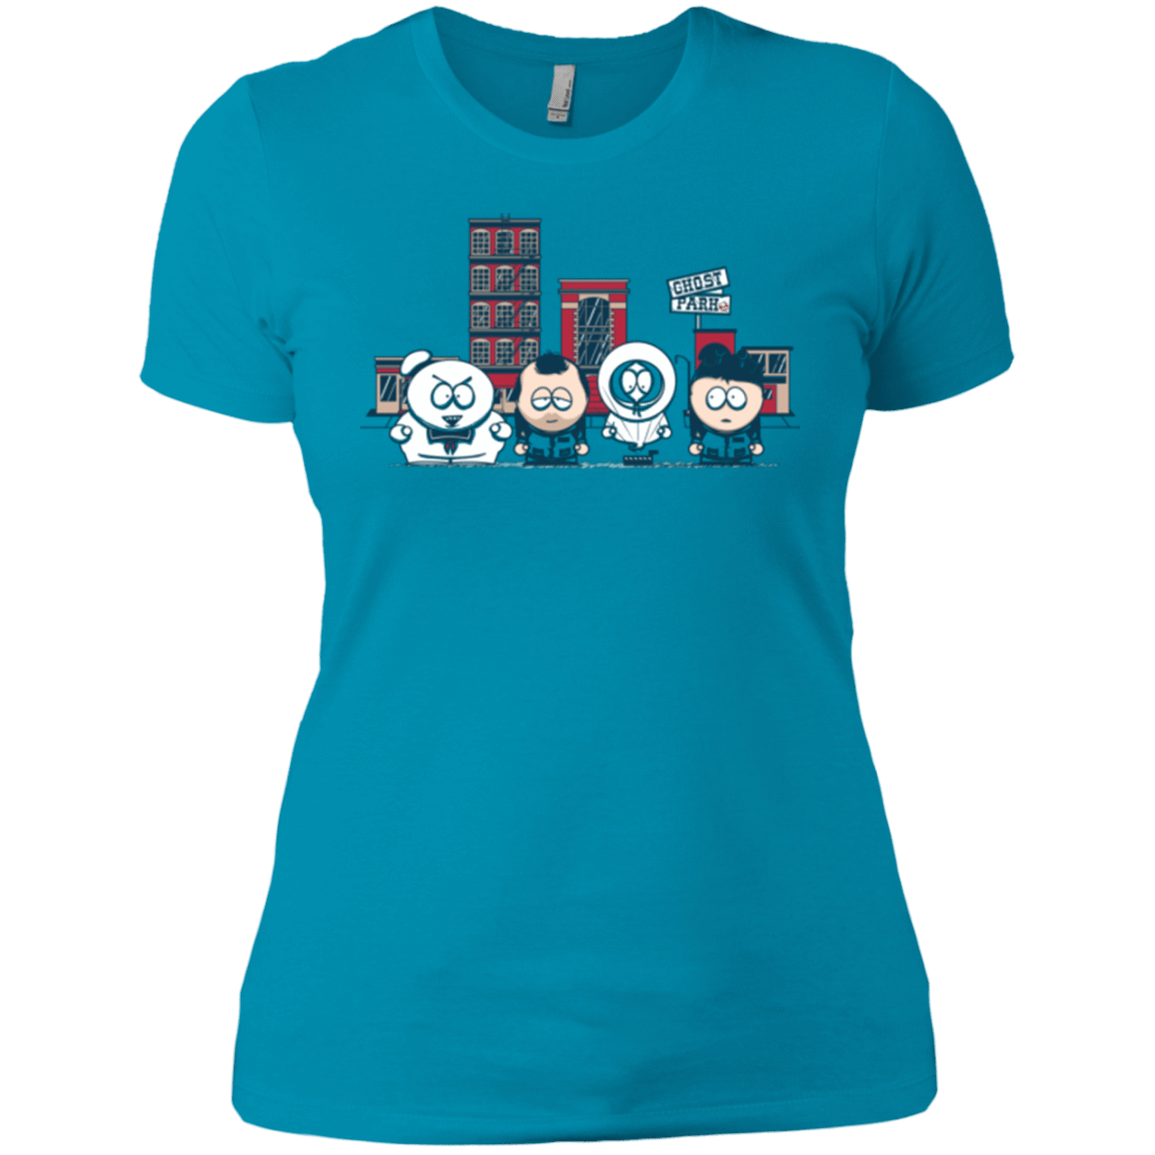 T-Shirts Turquoise / X-Small GHOST PARK Women's Premium T-Shirt